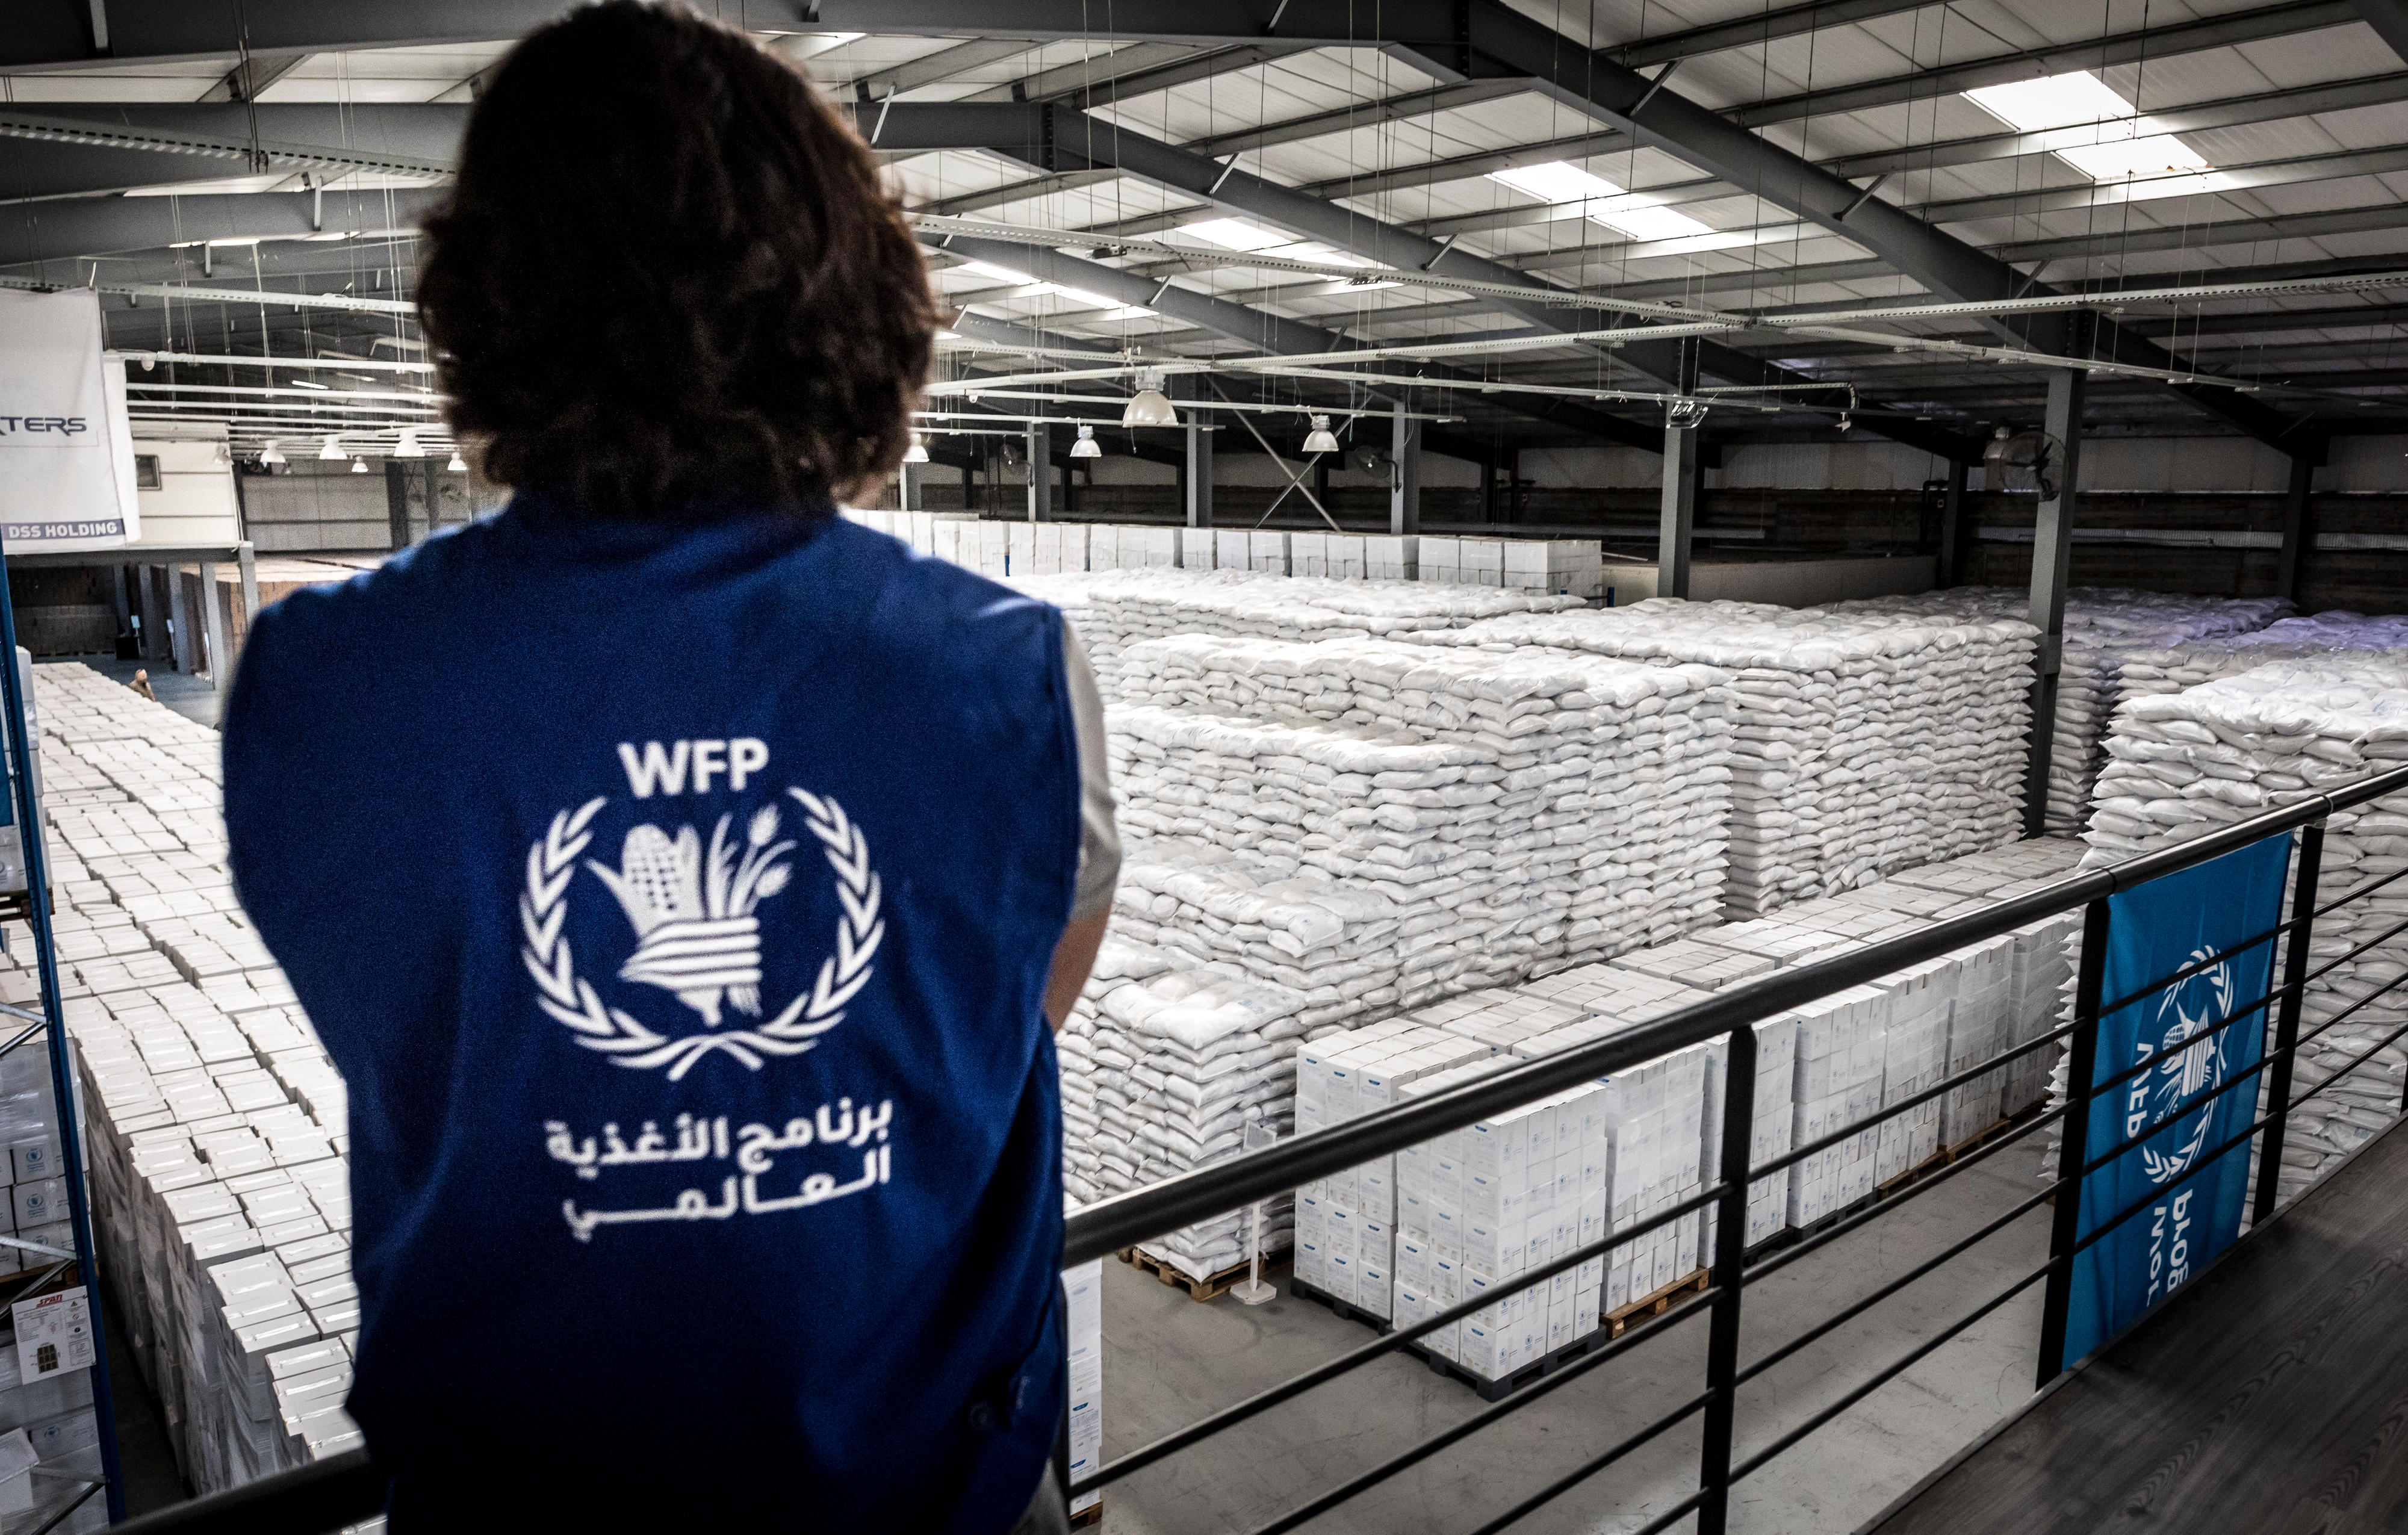 UN World Food Programme (WFP) food warehouse in Beirut, Lebanon: WFP logo on the back of a staff member.